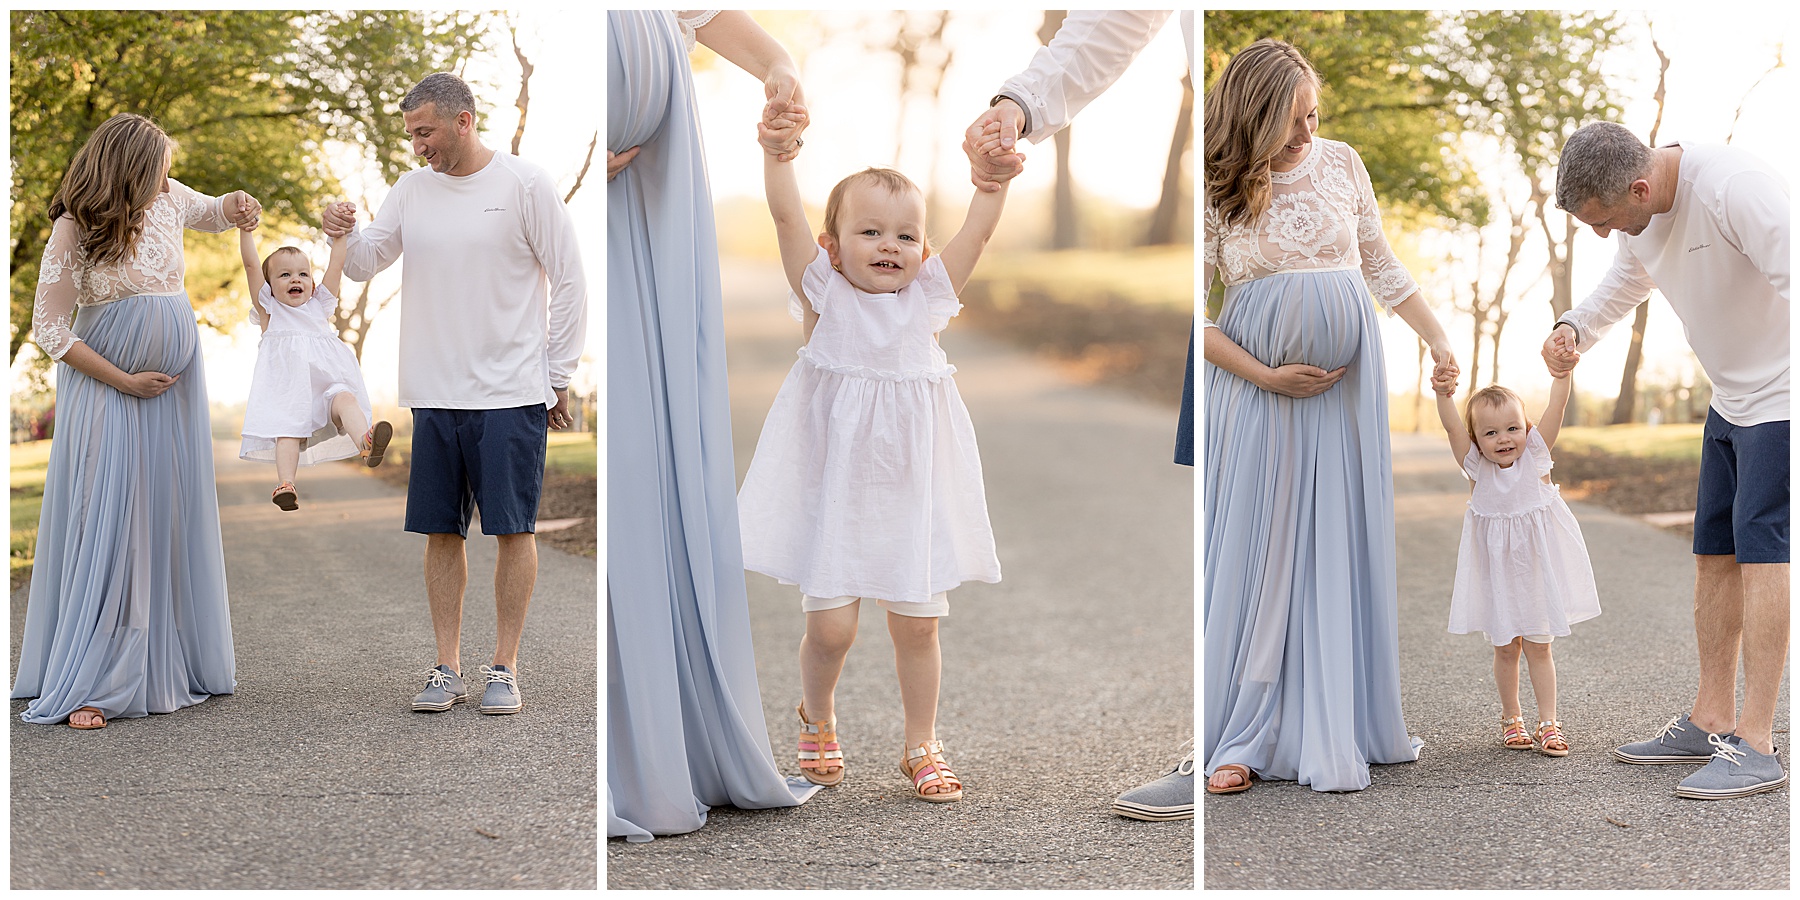 best day ever, toddler fun, Best Maternity Photographer